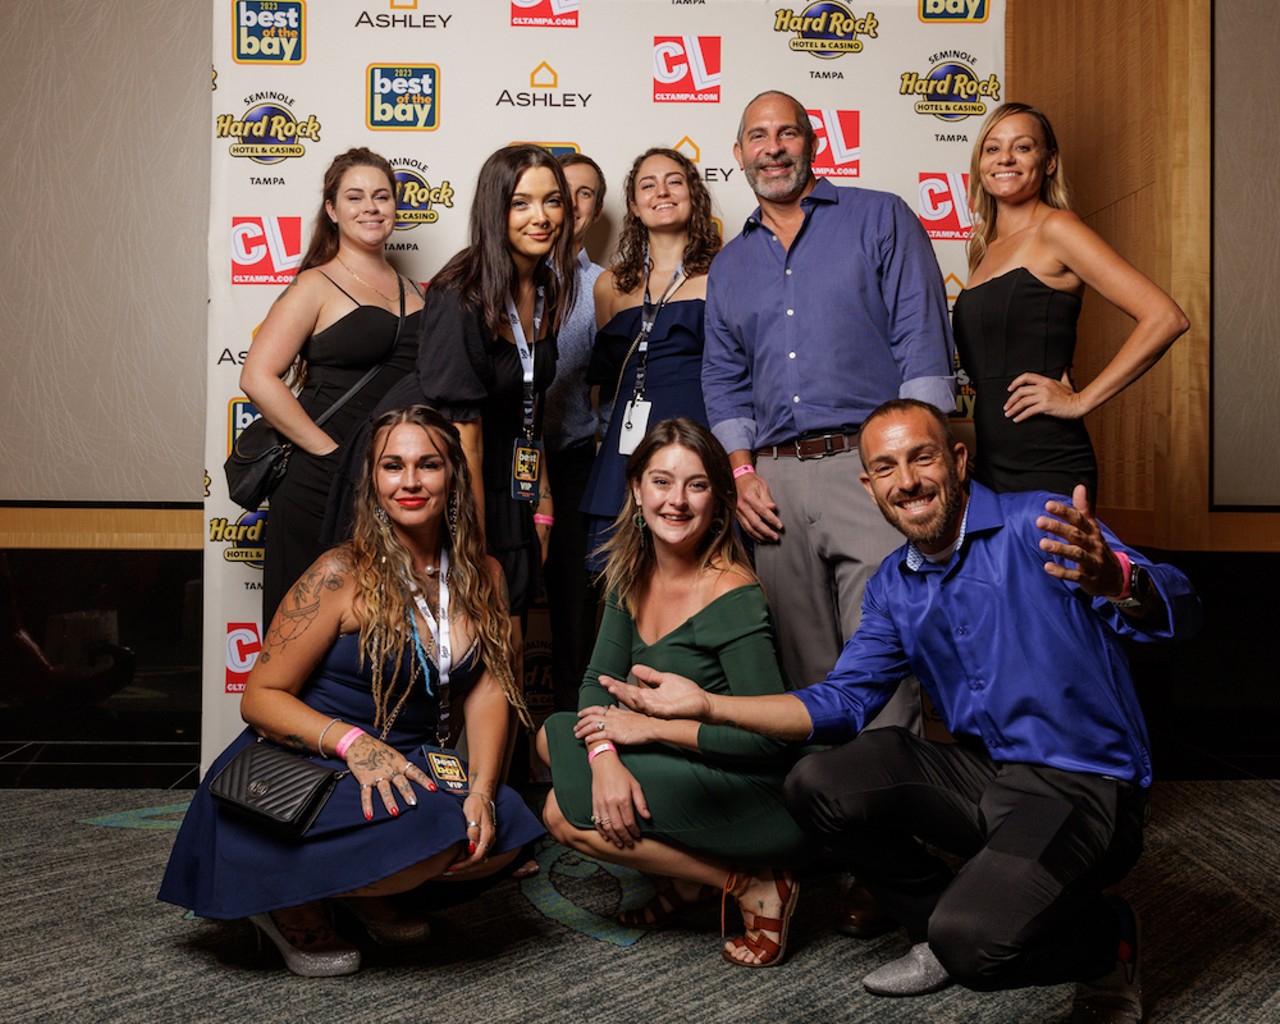 Everyone who stepped into Creative Loafing's Best of the Bay 2023 photo booth